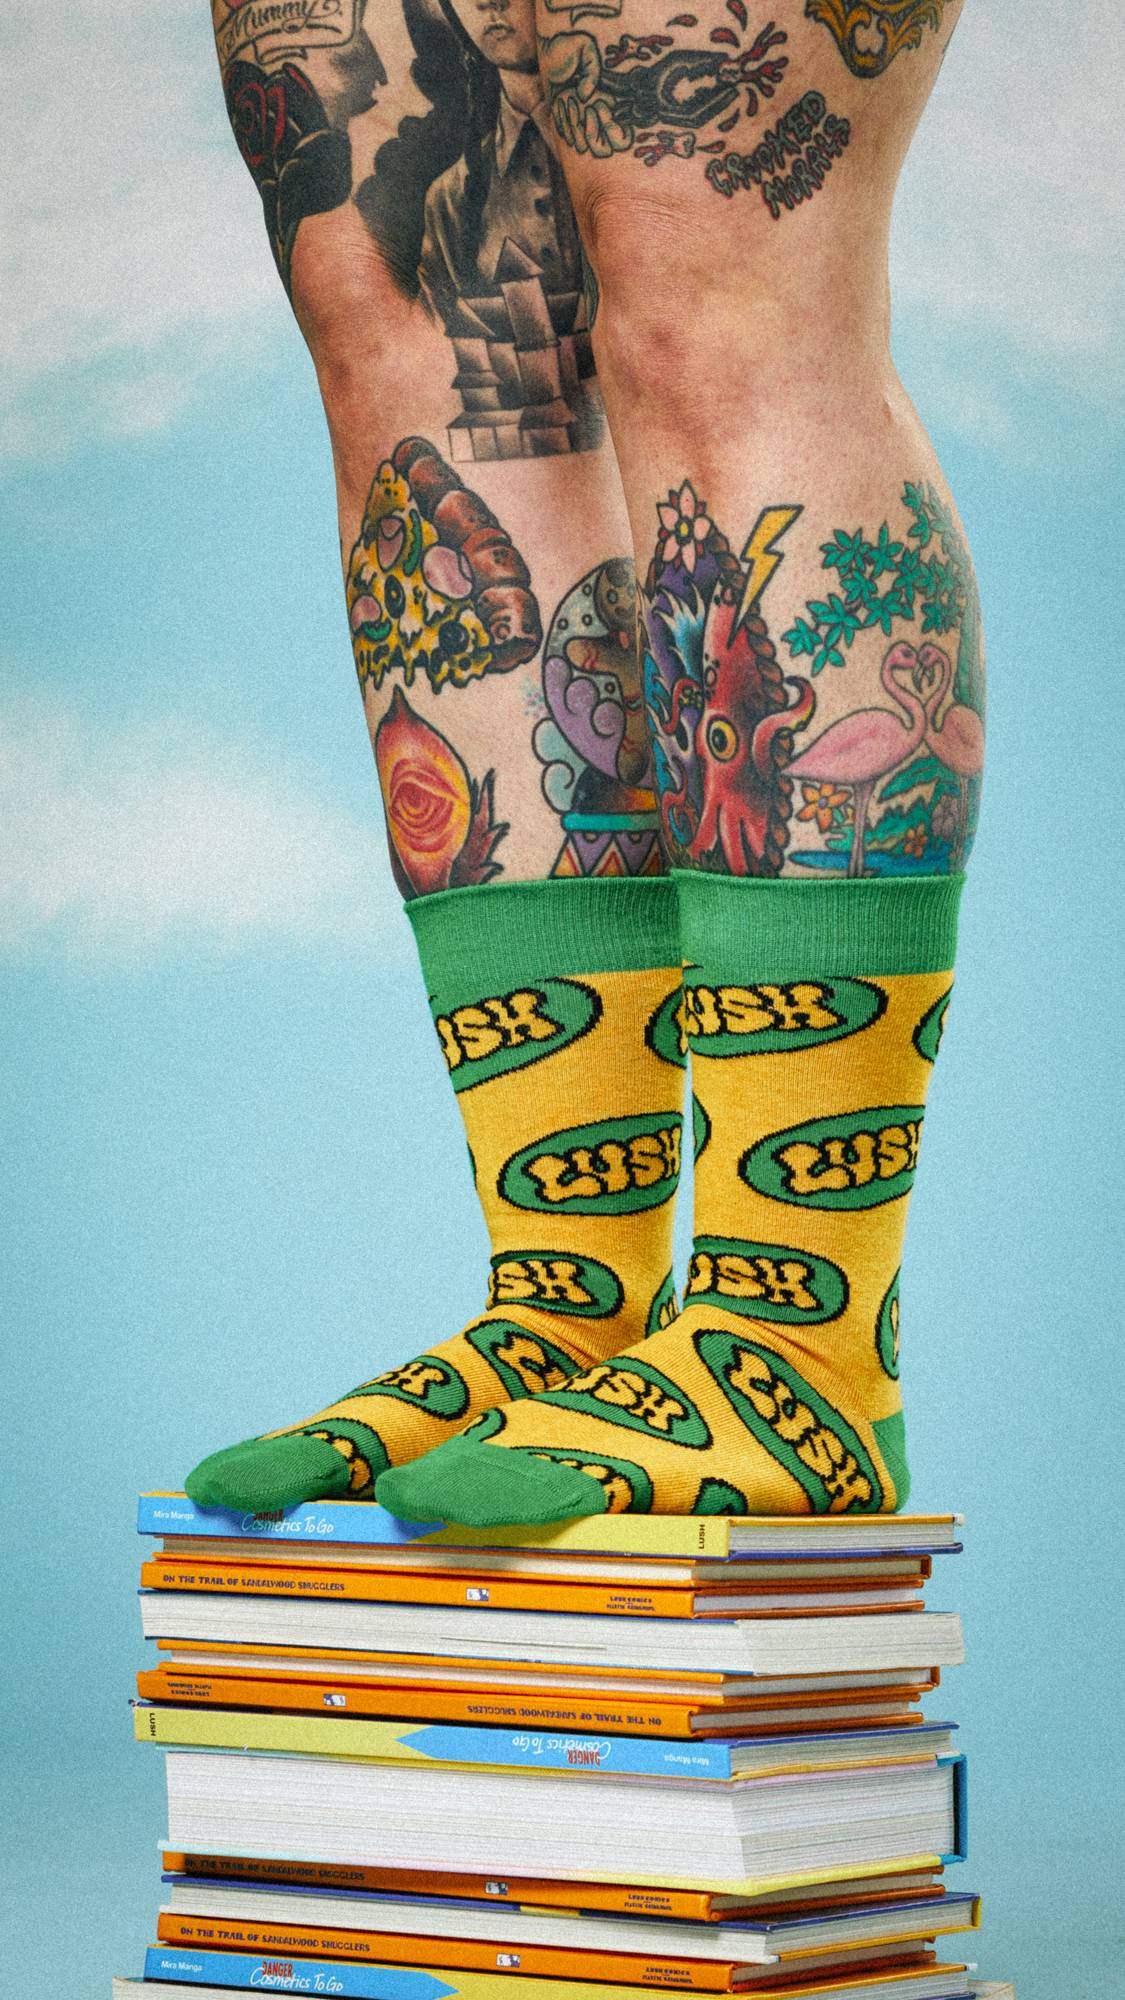 Model is heavily tattooed as we see them wearing the Retro Bubble Lush socks pulled to their calves, stood on a stack of books